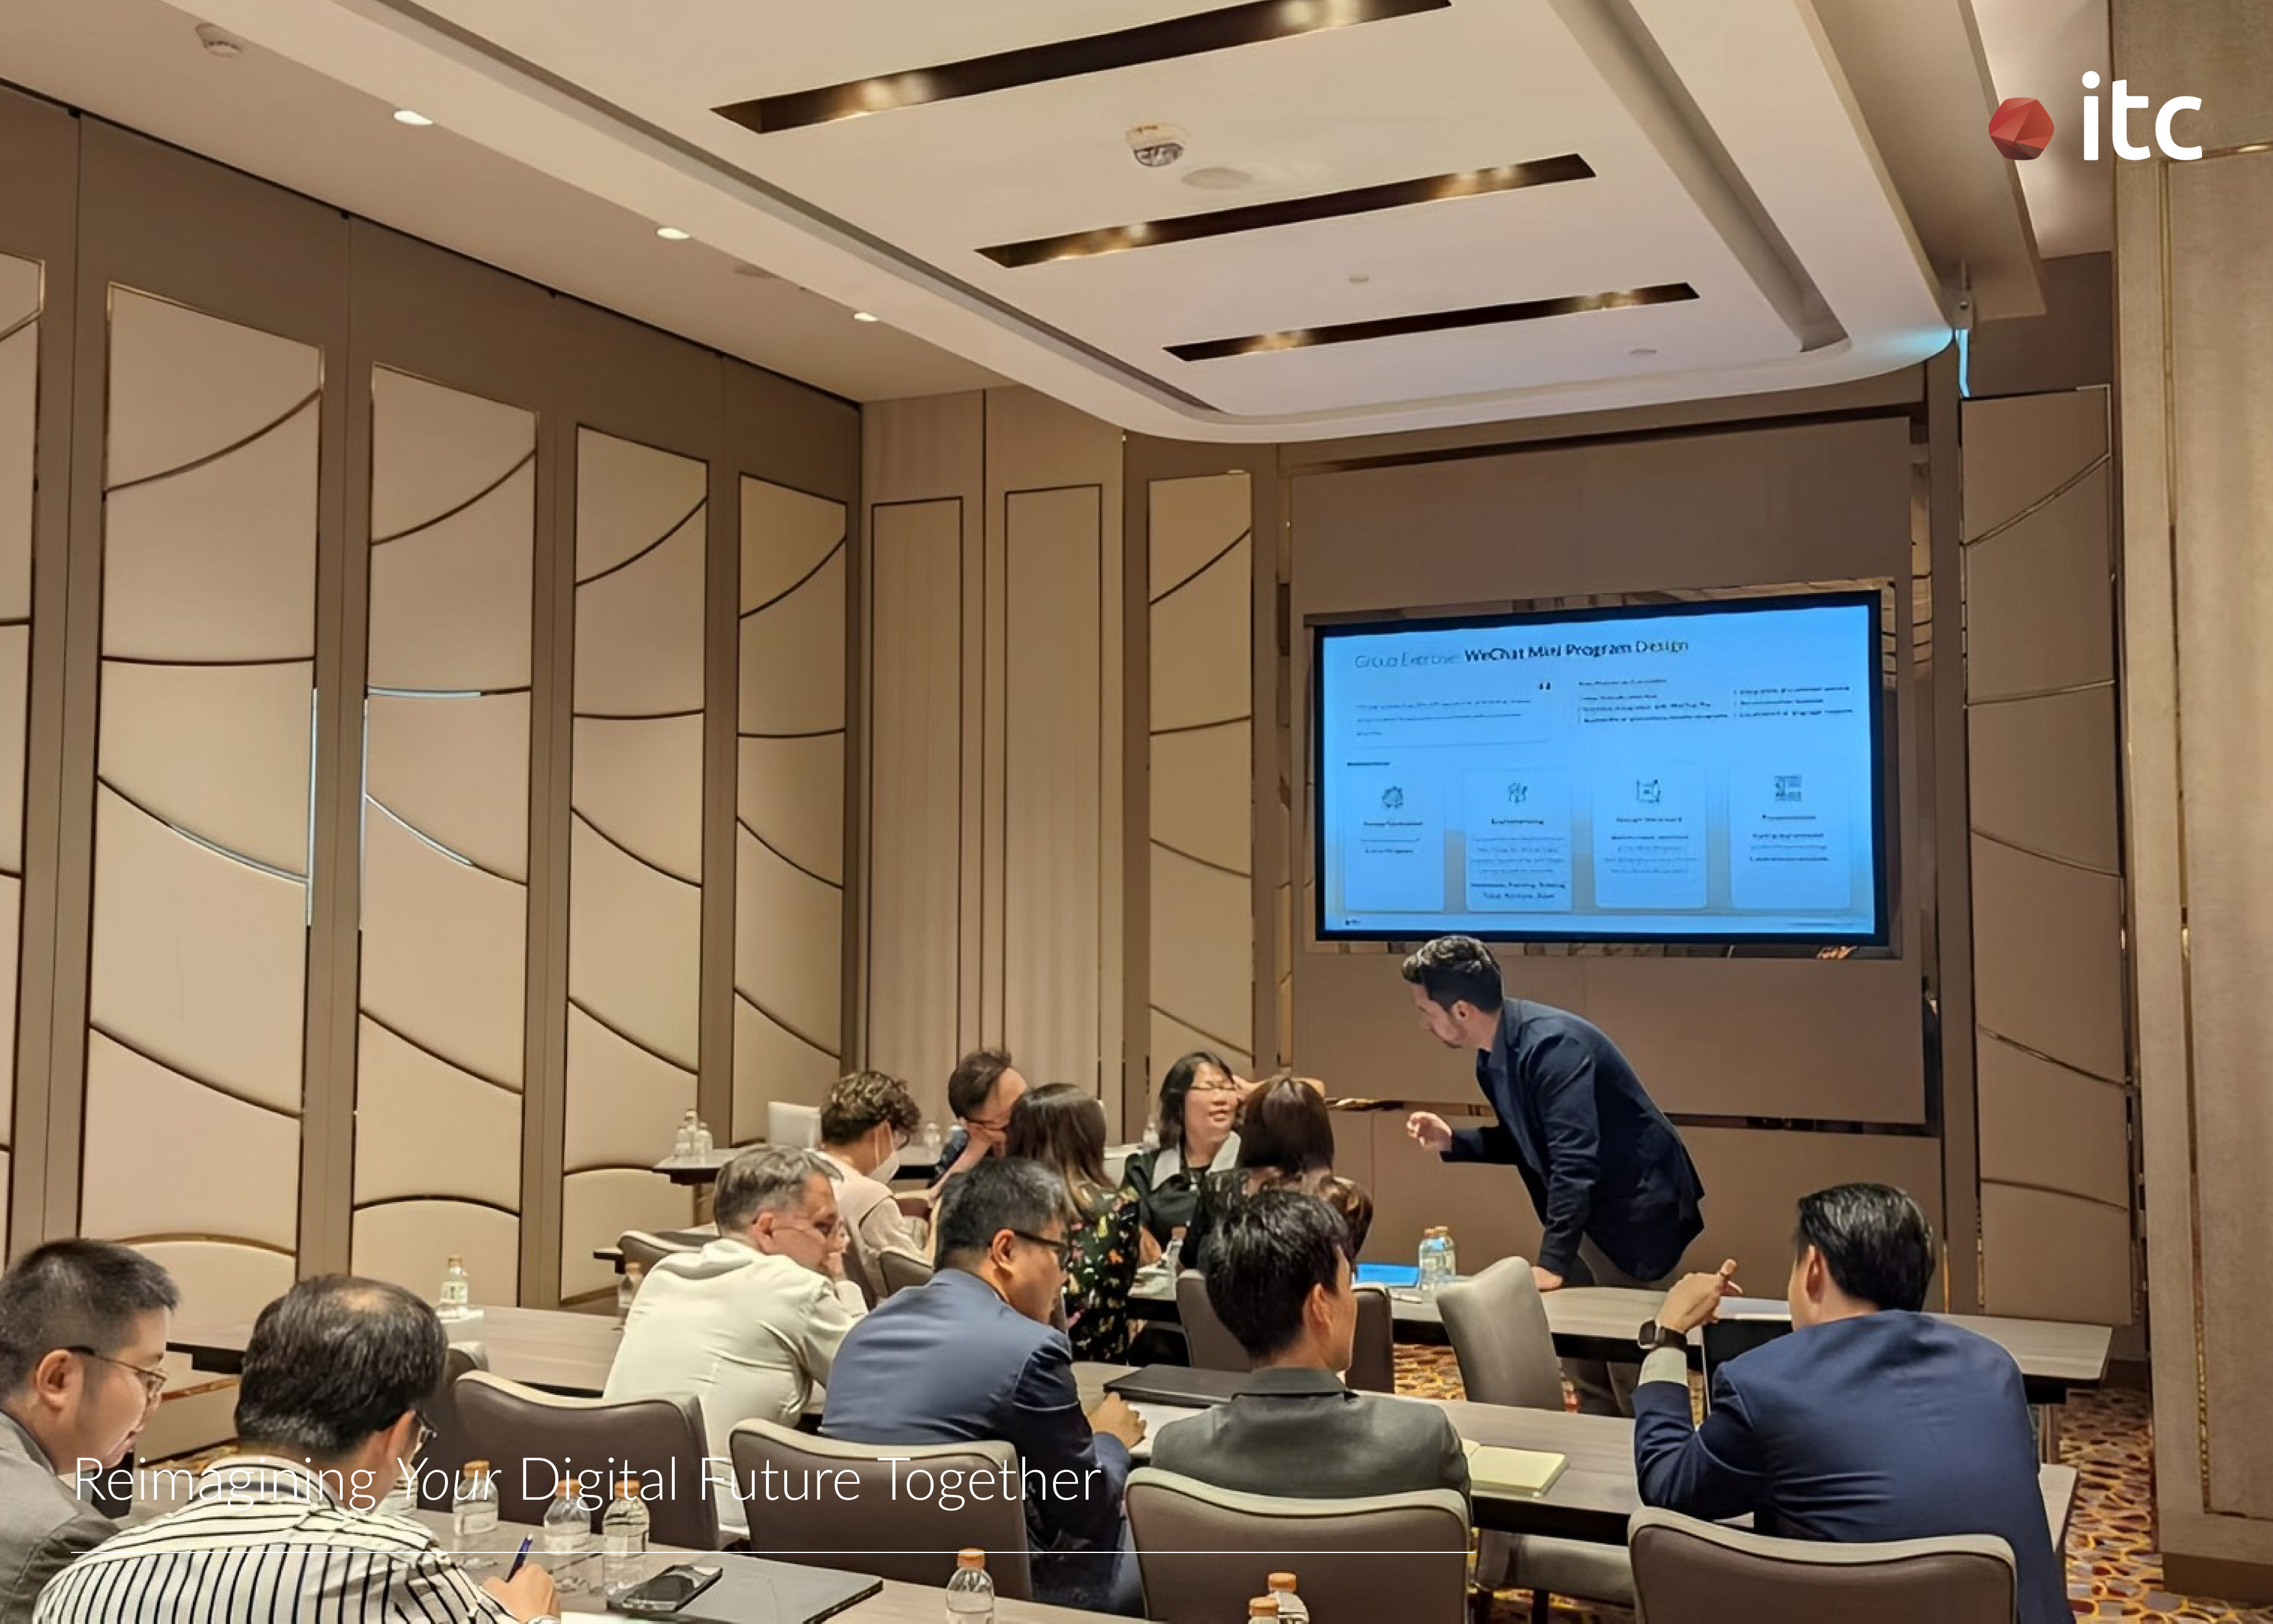 Interactive session during the workshop in Galaxy Macau meeting room